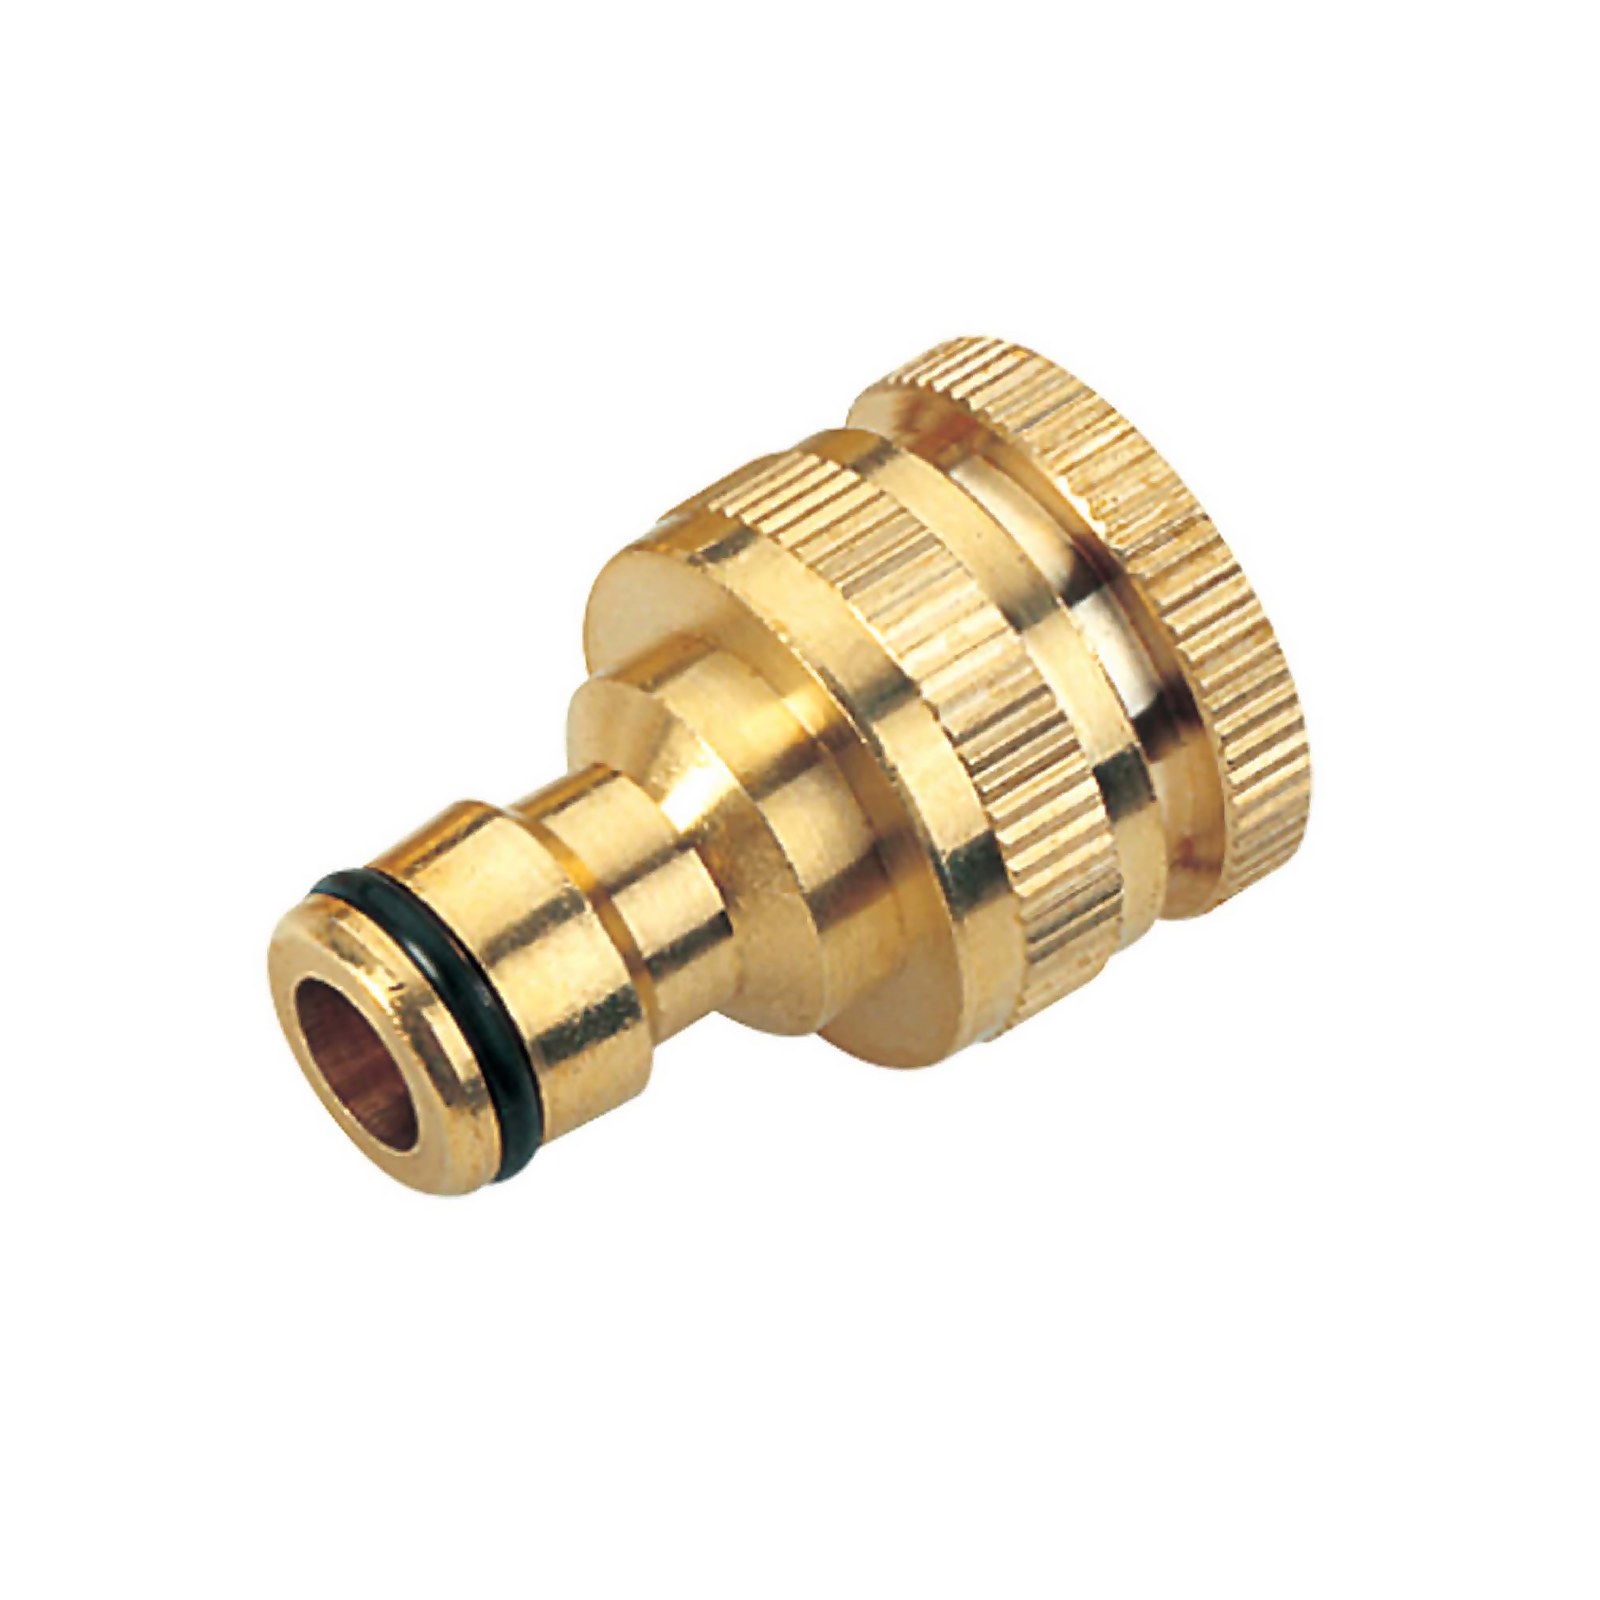 Photo of Hb Brass Threaded Tap Connector